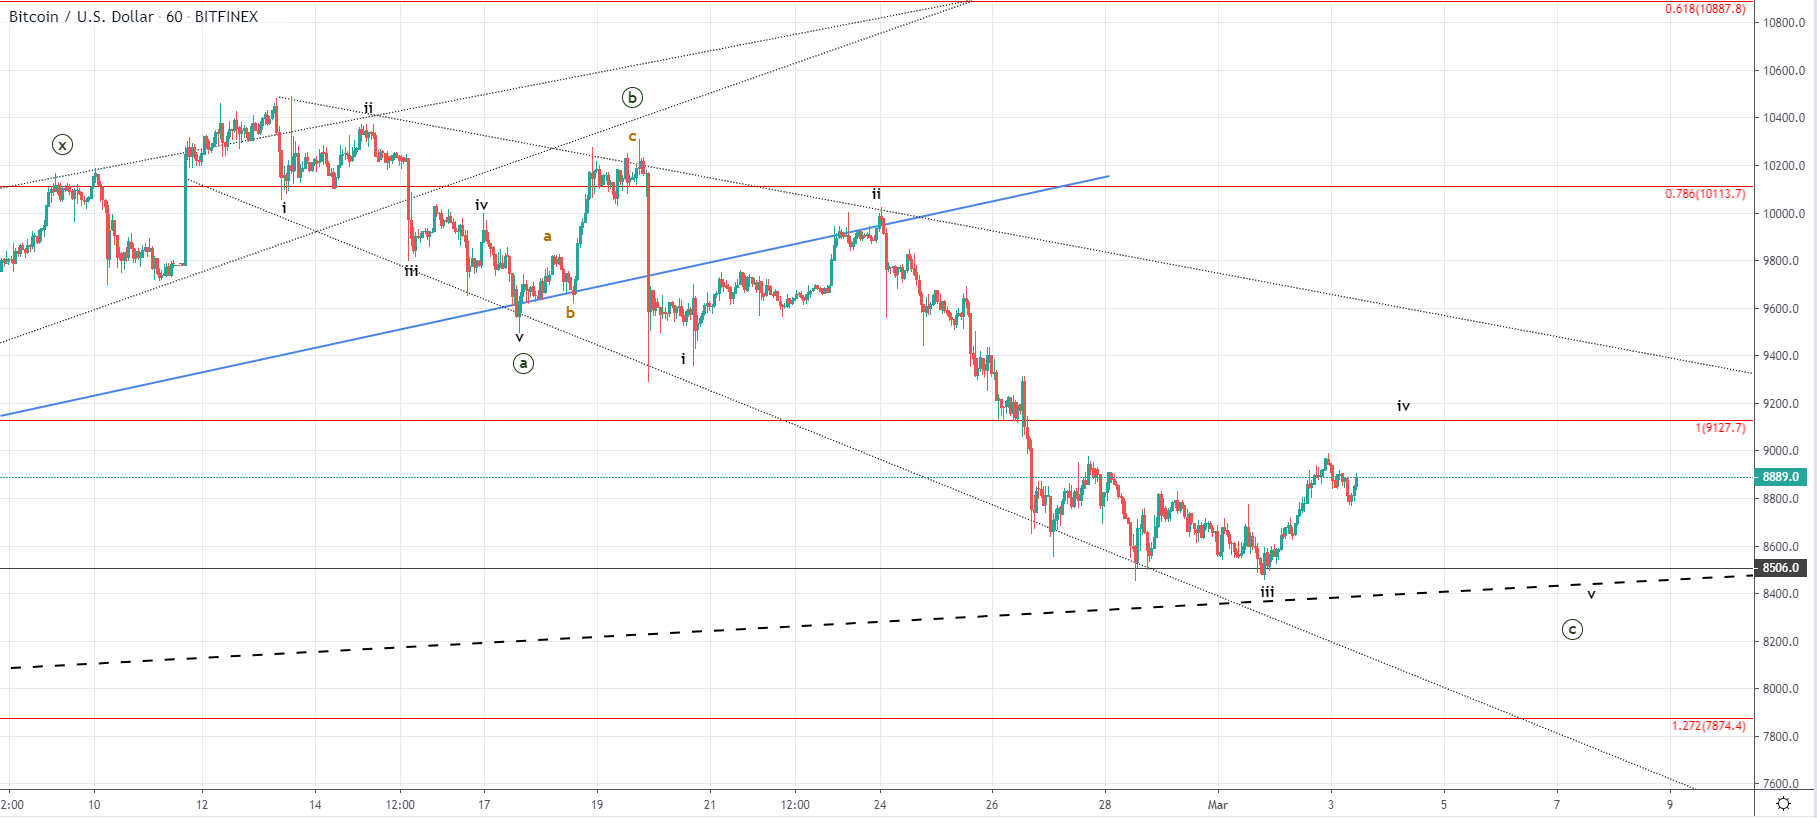 BTC and XRP - Has the correction ended? March 2020